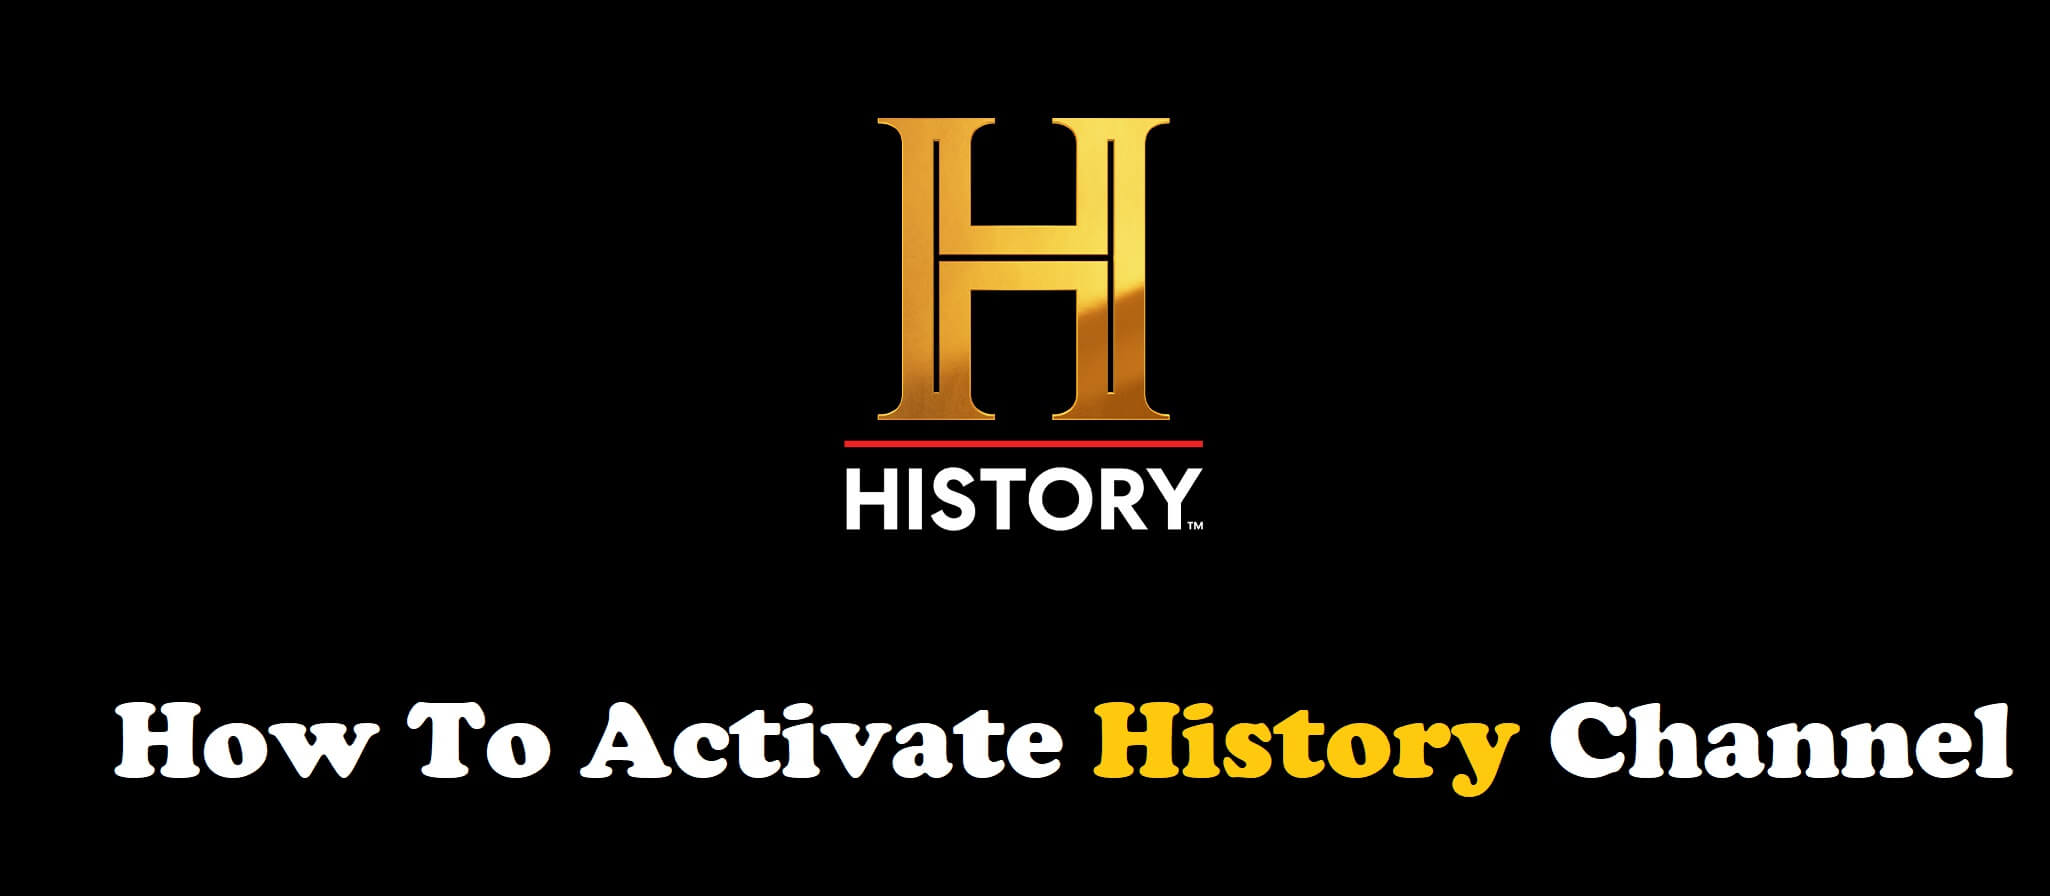 Activate History Channel